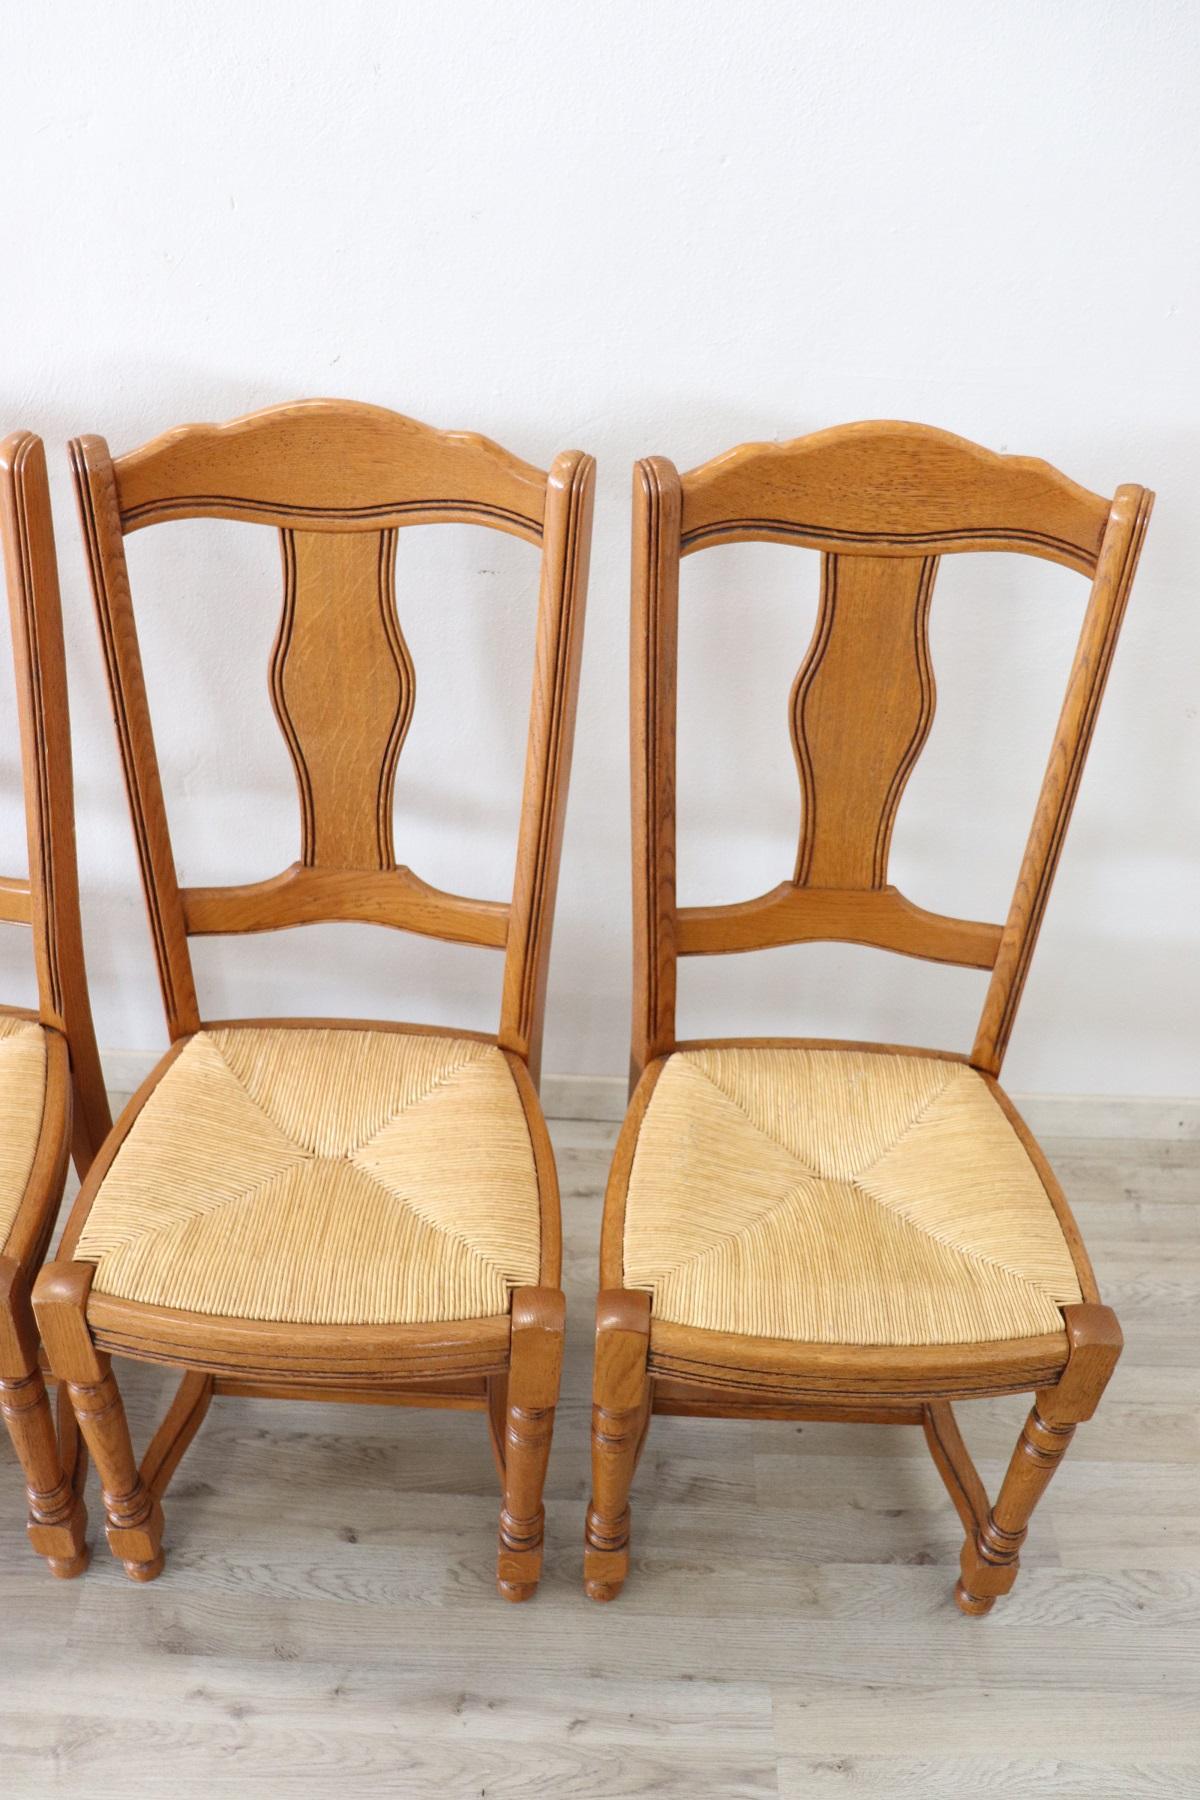 20th Century Italian Solid Oak Wood Set of Six Chairs with Straw Seat 1